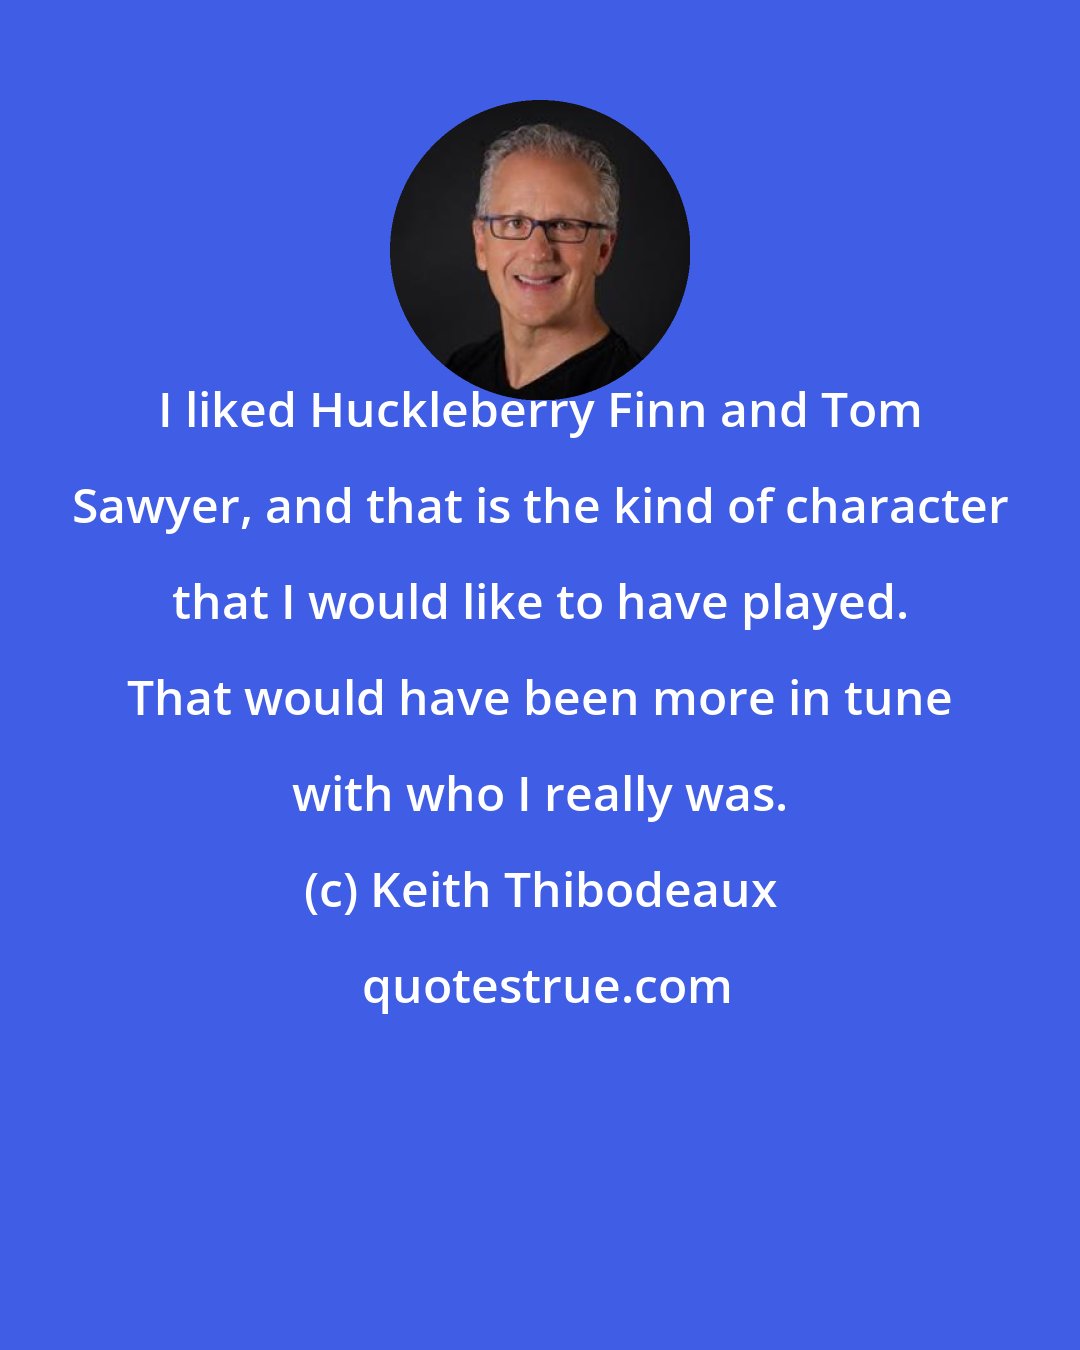 Keith Thibodeaux: I liked Huckleberry Finn and Tom Sawyer, and that is the kind of character that I would like to have played. That would have been more in tune with who I really was.